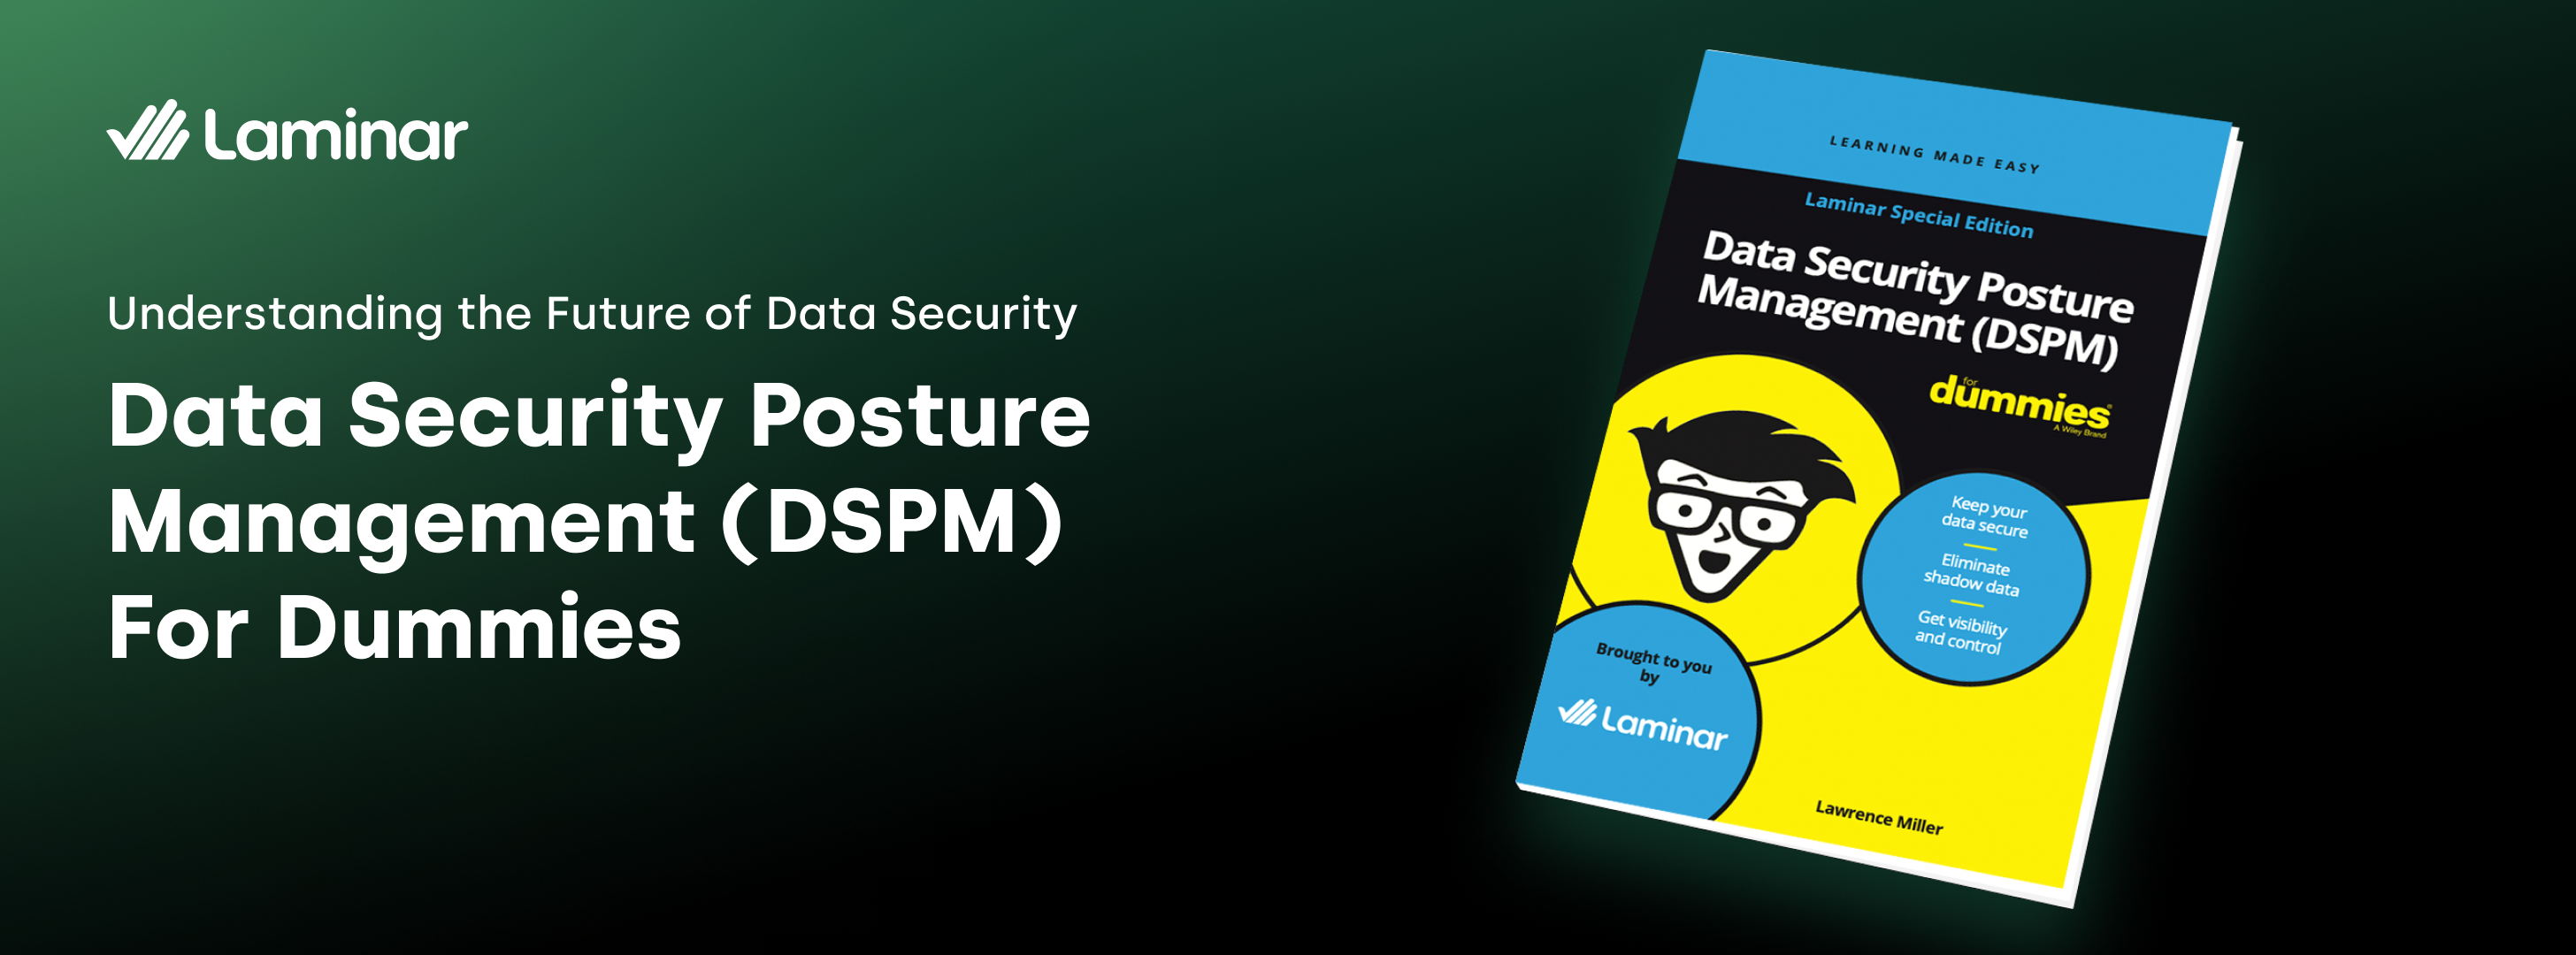 Data Security Posture Management (DSPM) For Dummies